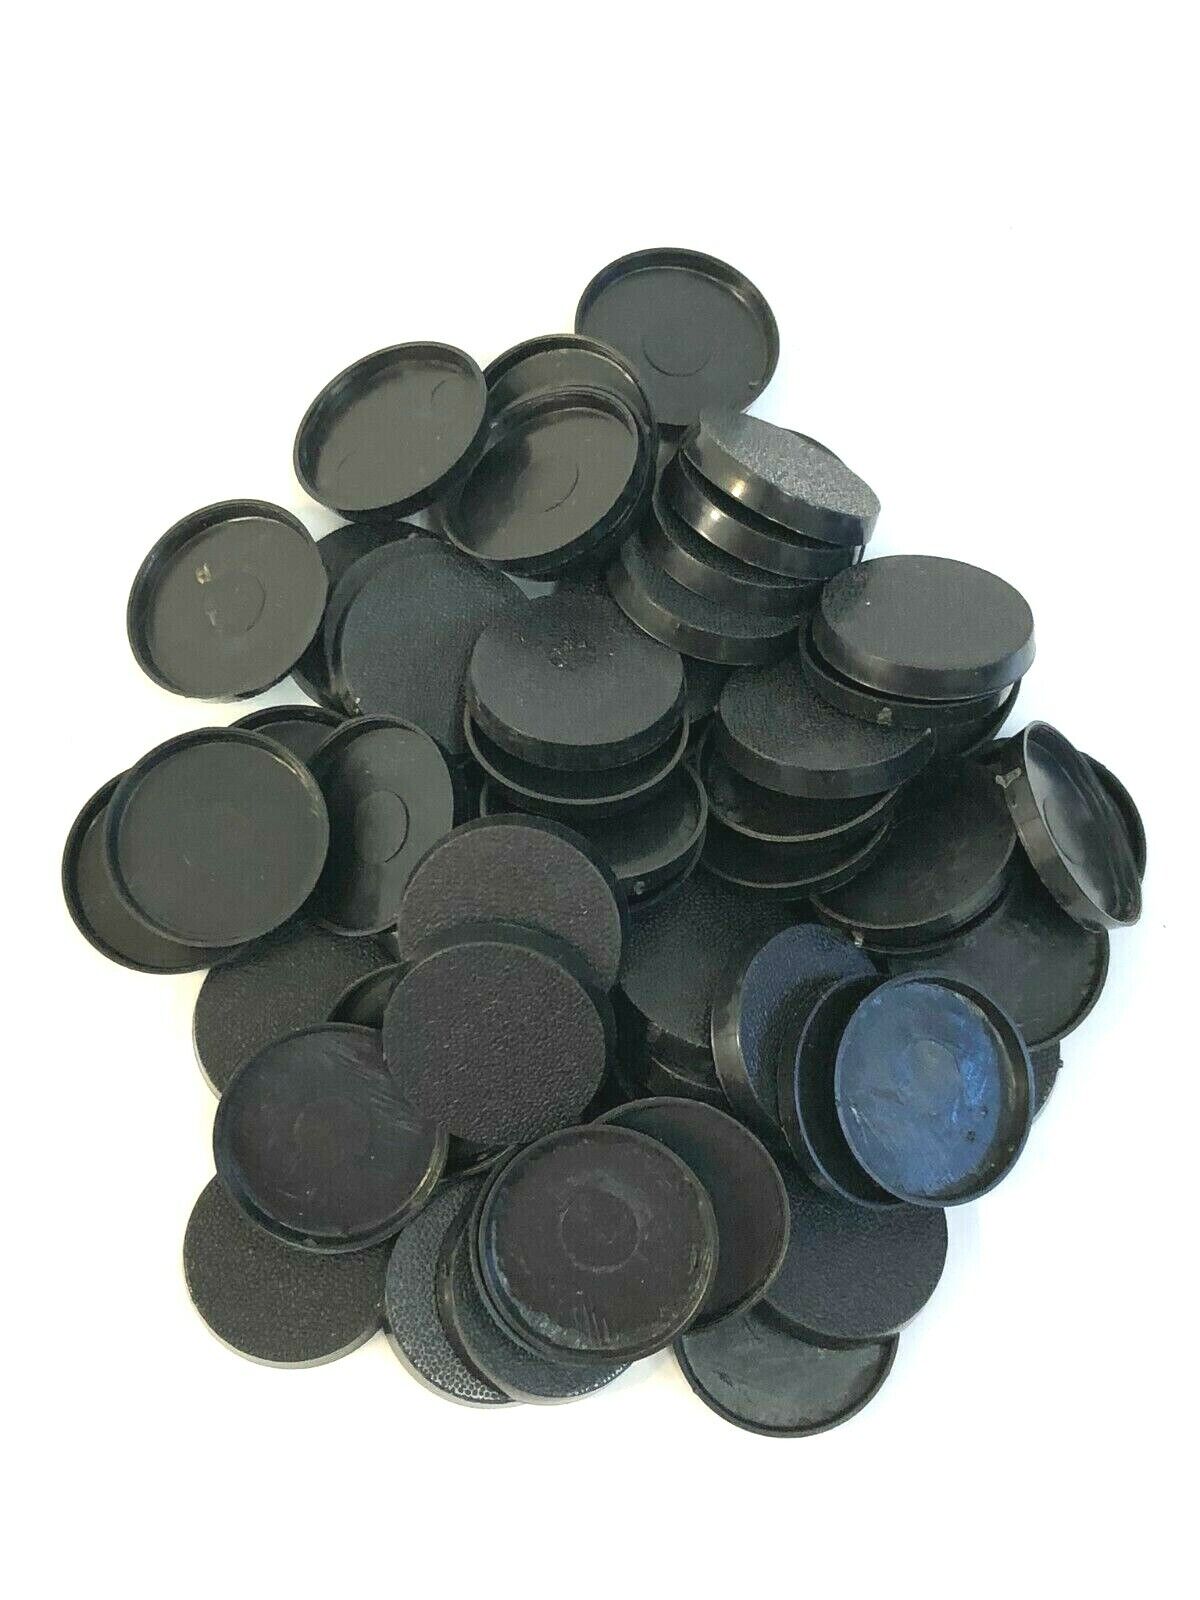 Lot Of 60 25mm Round Bases For Warhammer 40k & AoS Games Workshop Bitz  Unbranded Does not Apply